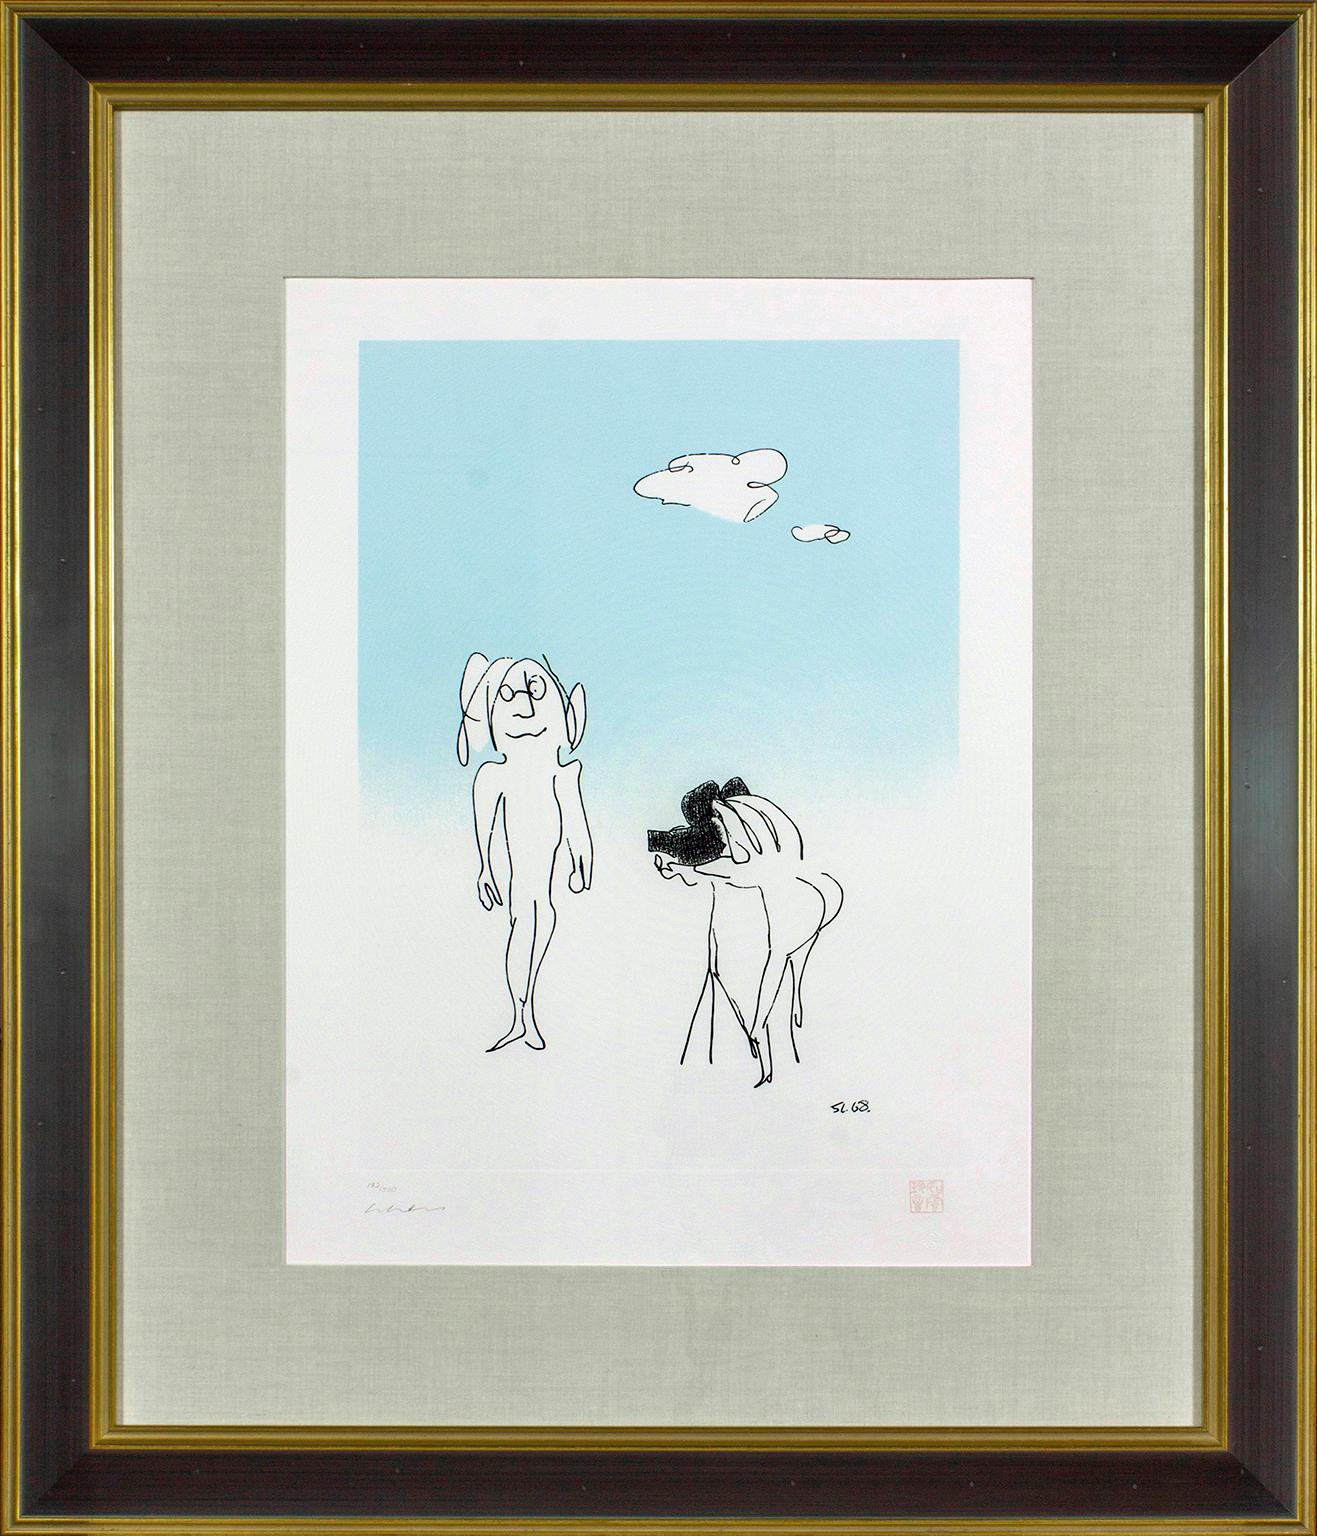 Framed, inscribed serigraph of "Smile No. 5" by John Lennon from edition of 300